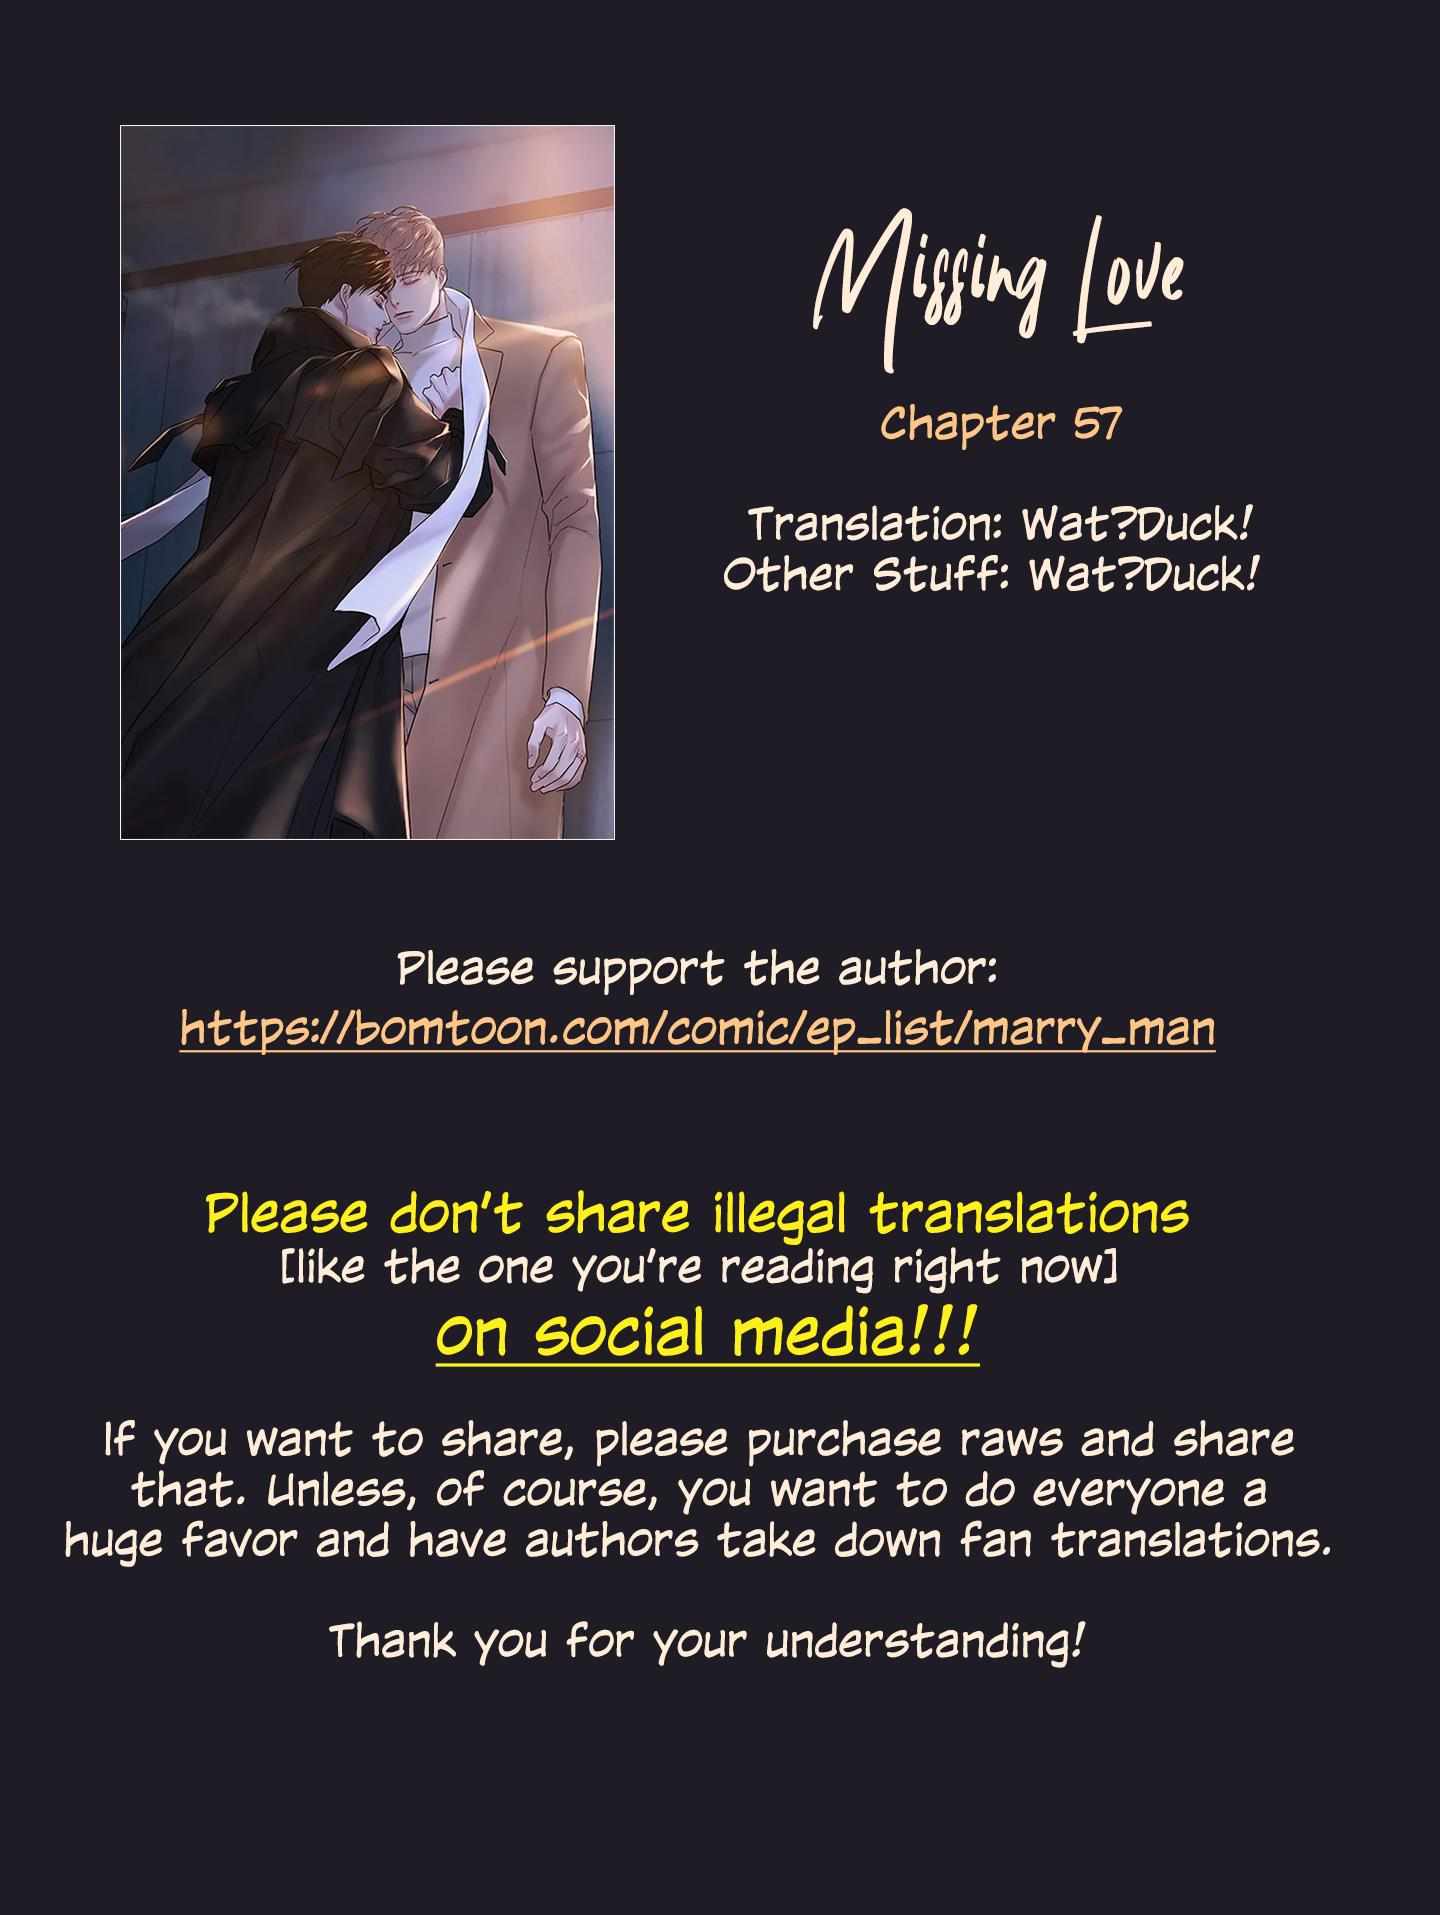 Missing Love: A Married Man - Page 2